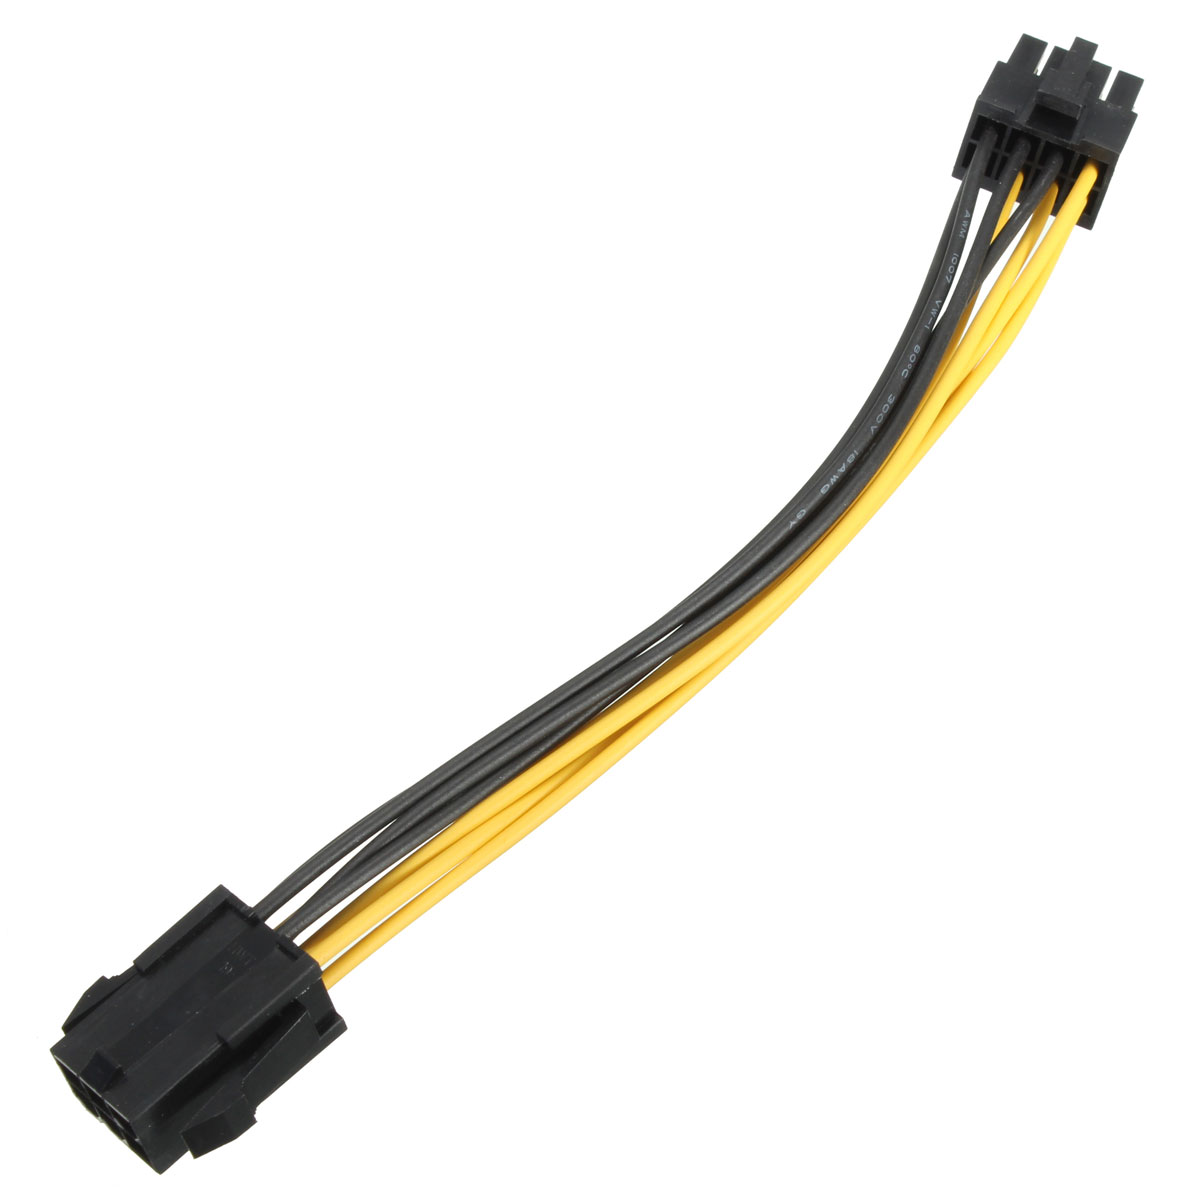 6Pin-to-8Pin-PCI-Express-PCI-E-Power-Converter-Cable-Cord-Connector-For-CPU-Video-Card-1357977